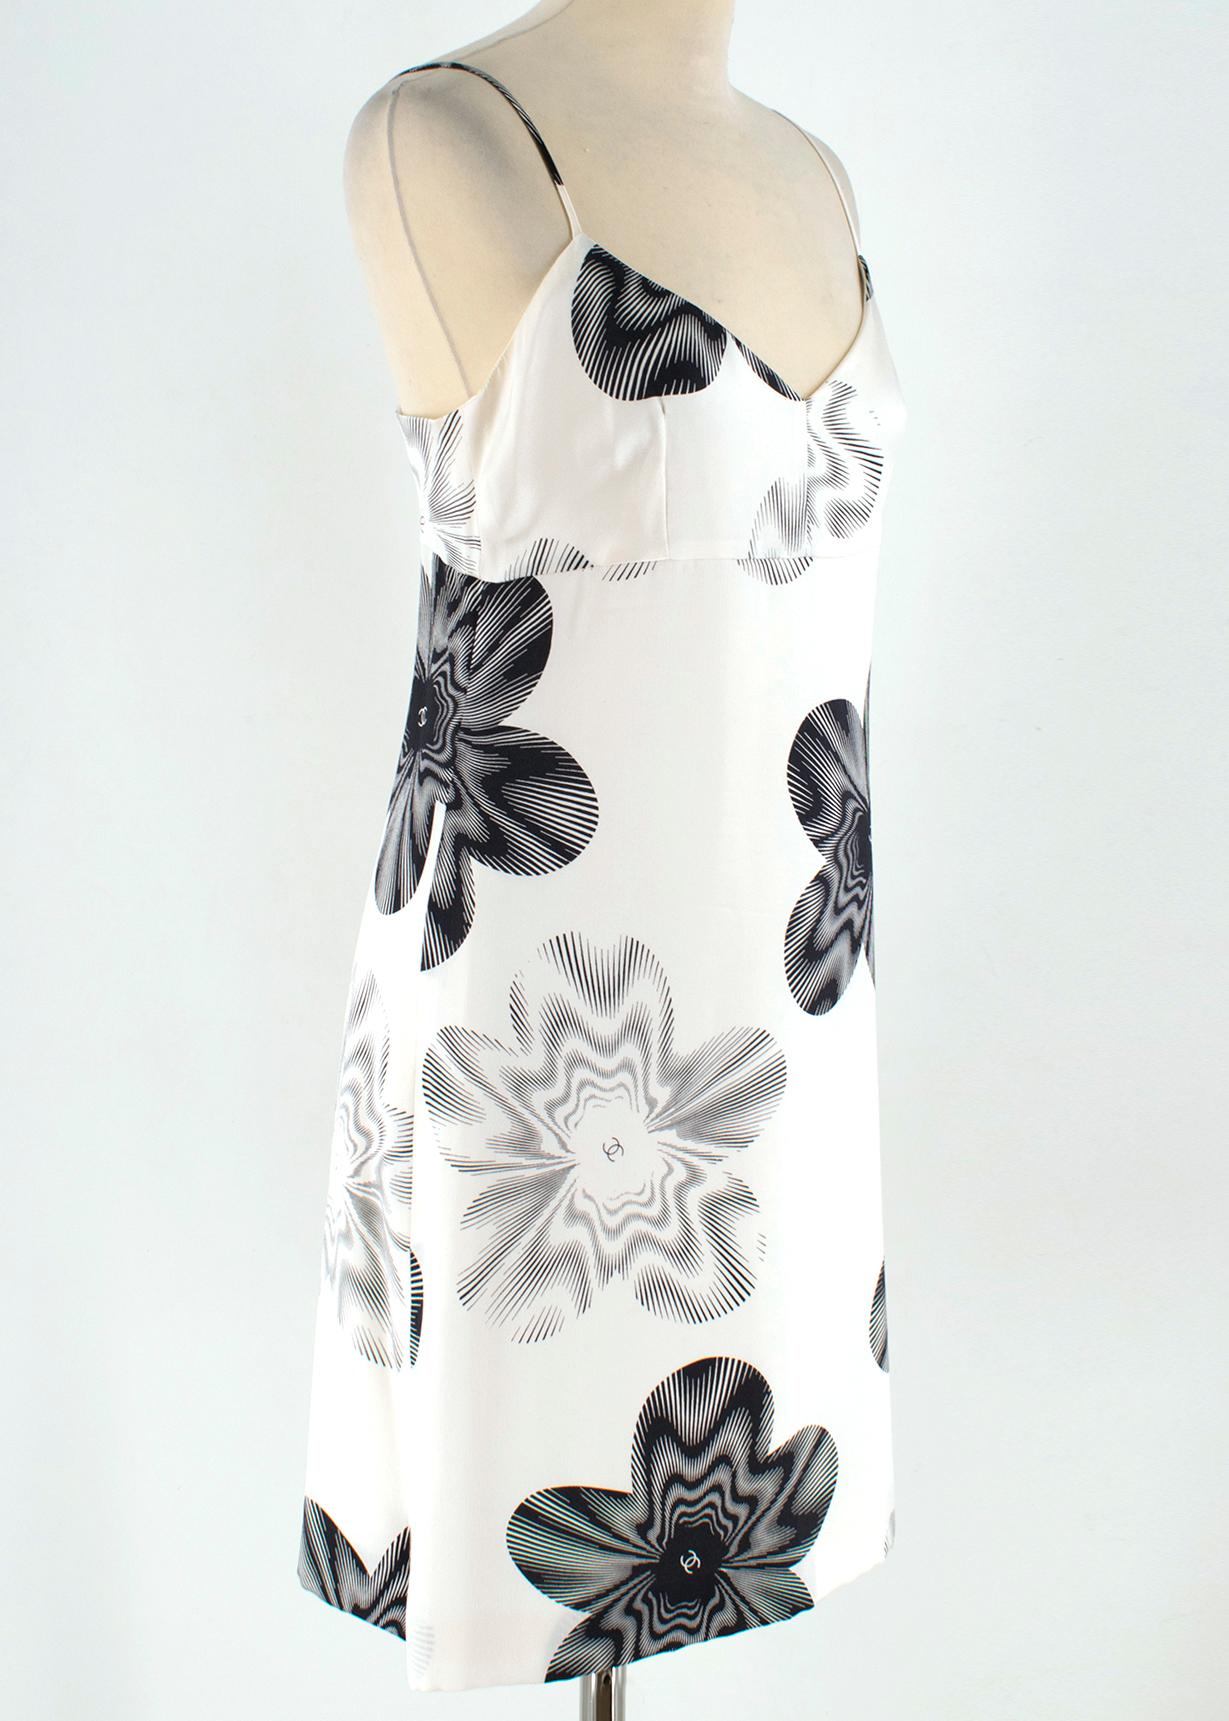 Chanel Cream Silk Floral Patterned Slip Dress 

- Silk cream slip mini dress with contrasting floral CC pattern
- V- neck
- Back zip & button closure 
- Made in France
- Fully Lined

Please note, these items are pre-owned and may show signs of being